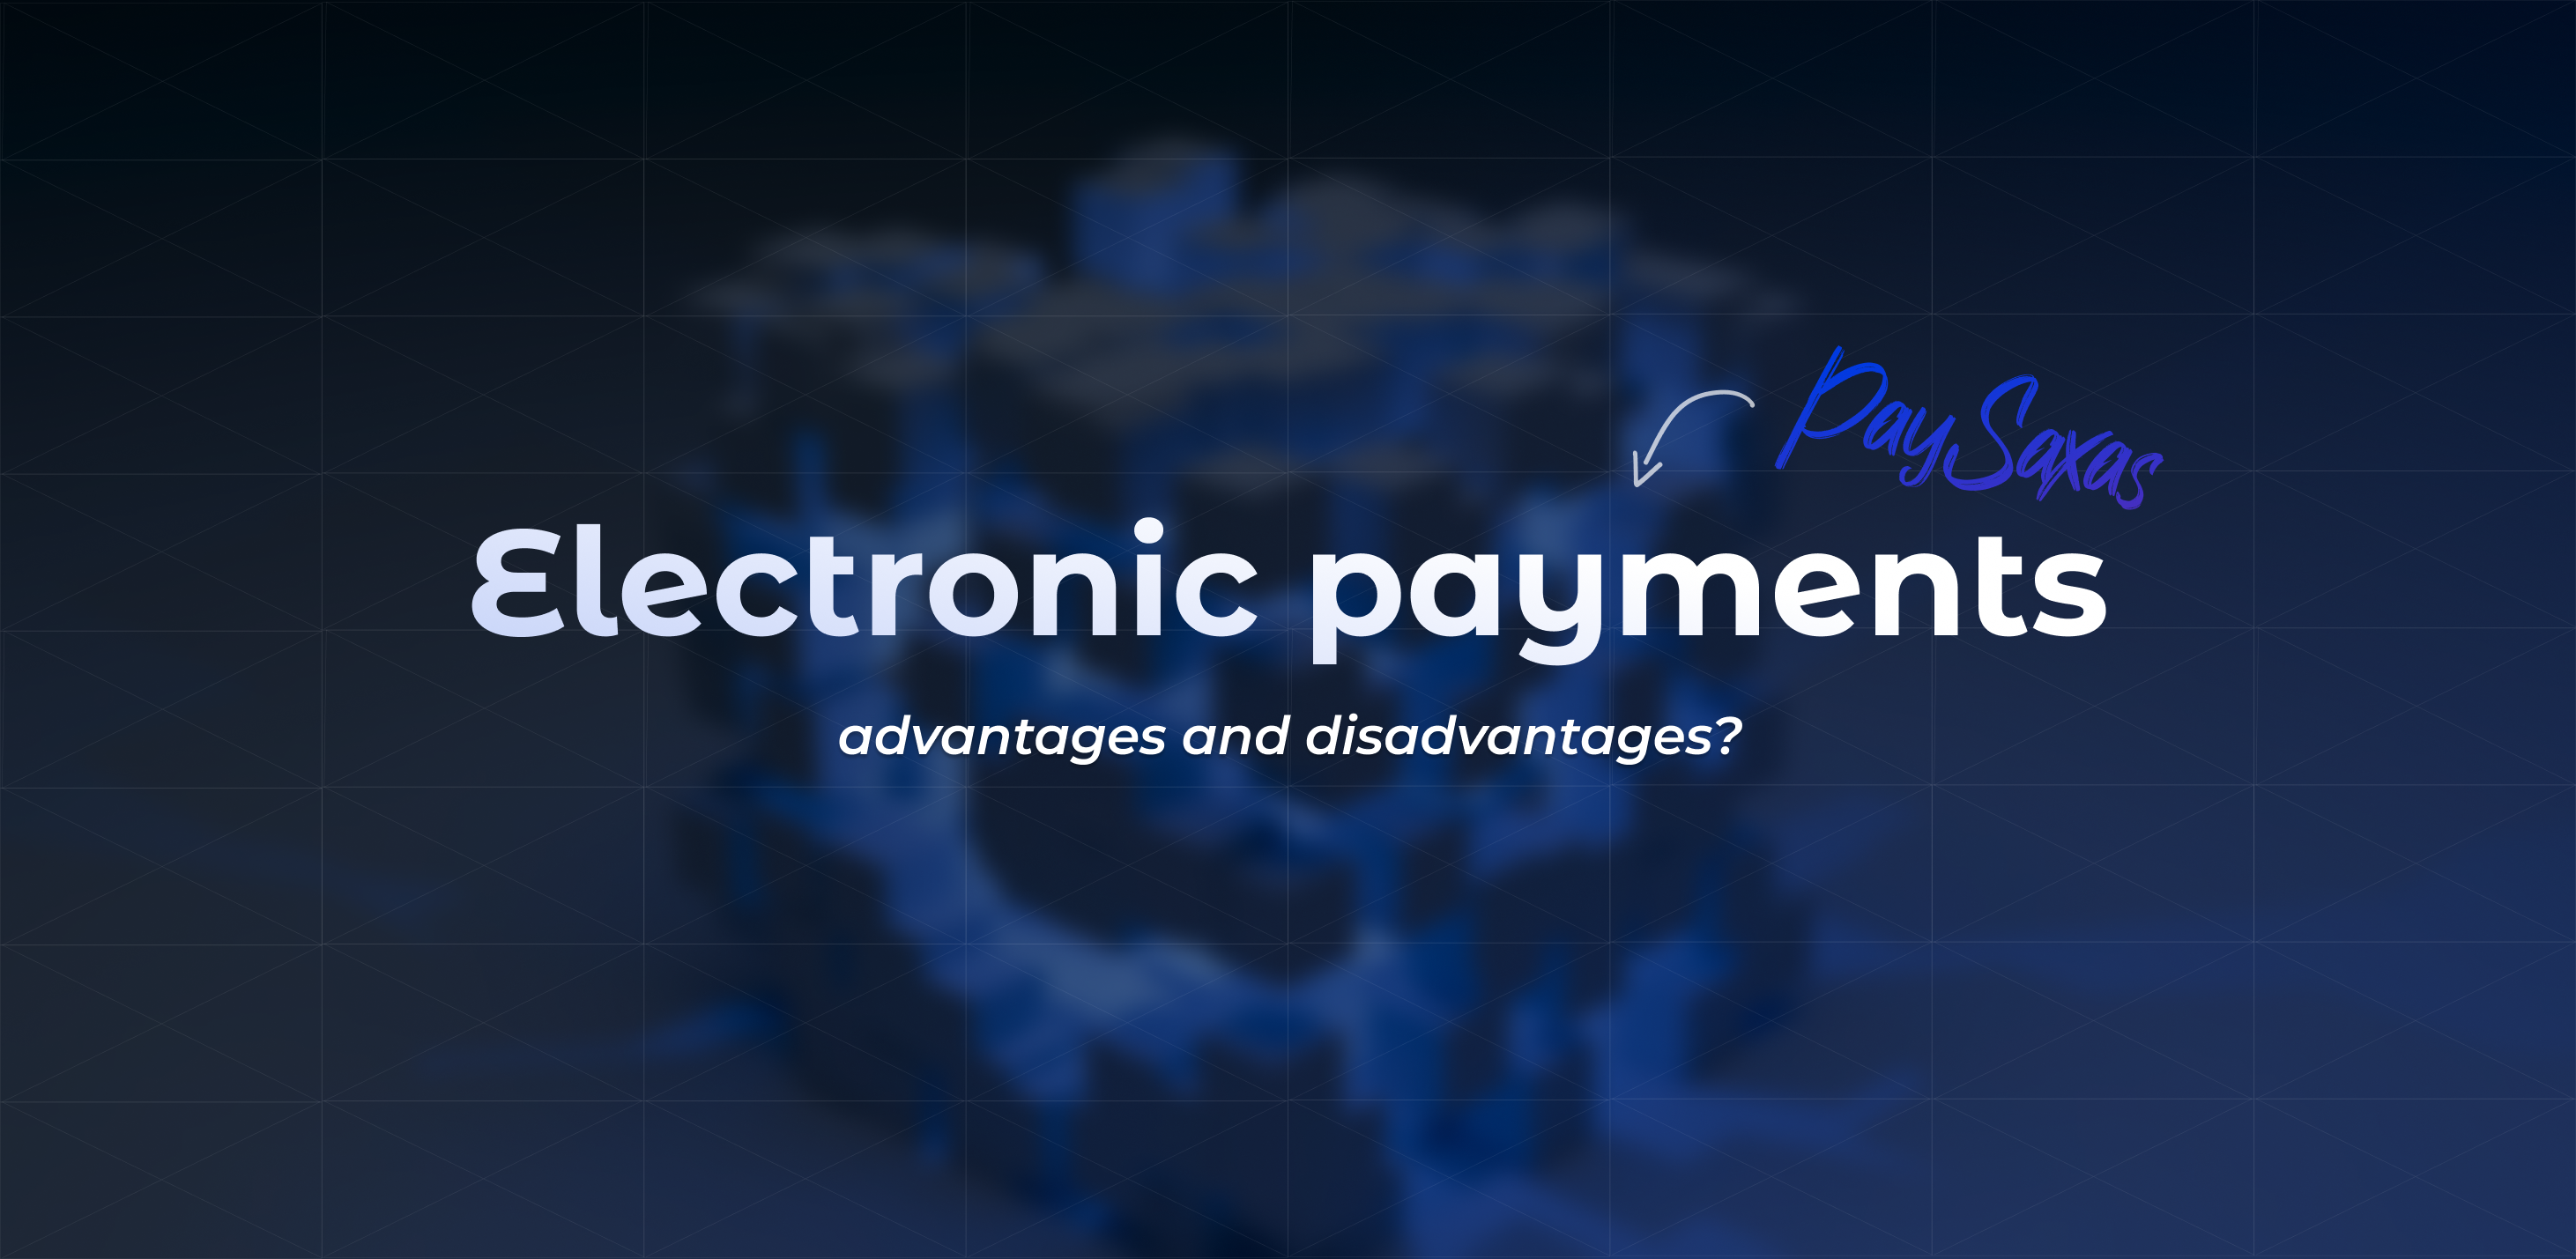 Electronic payments: pros and cons